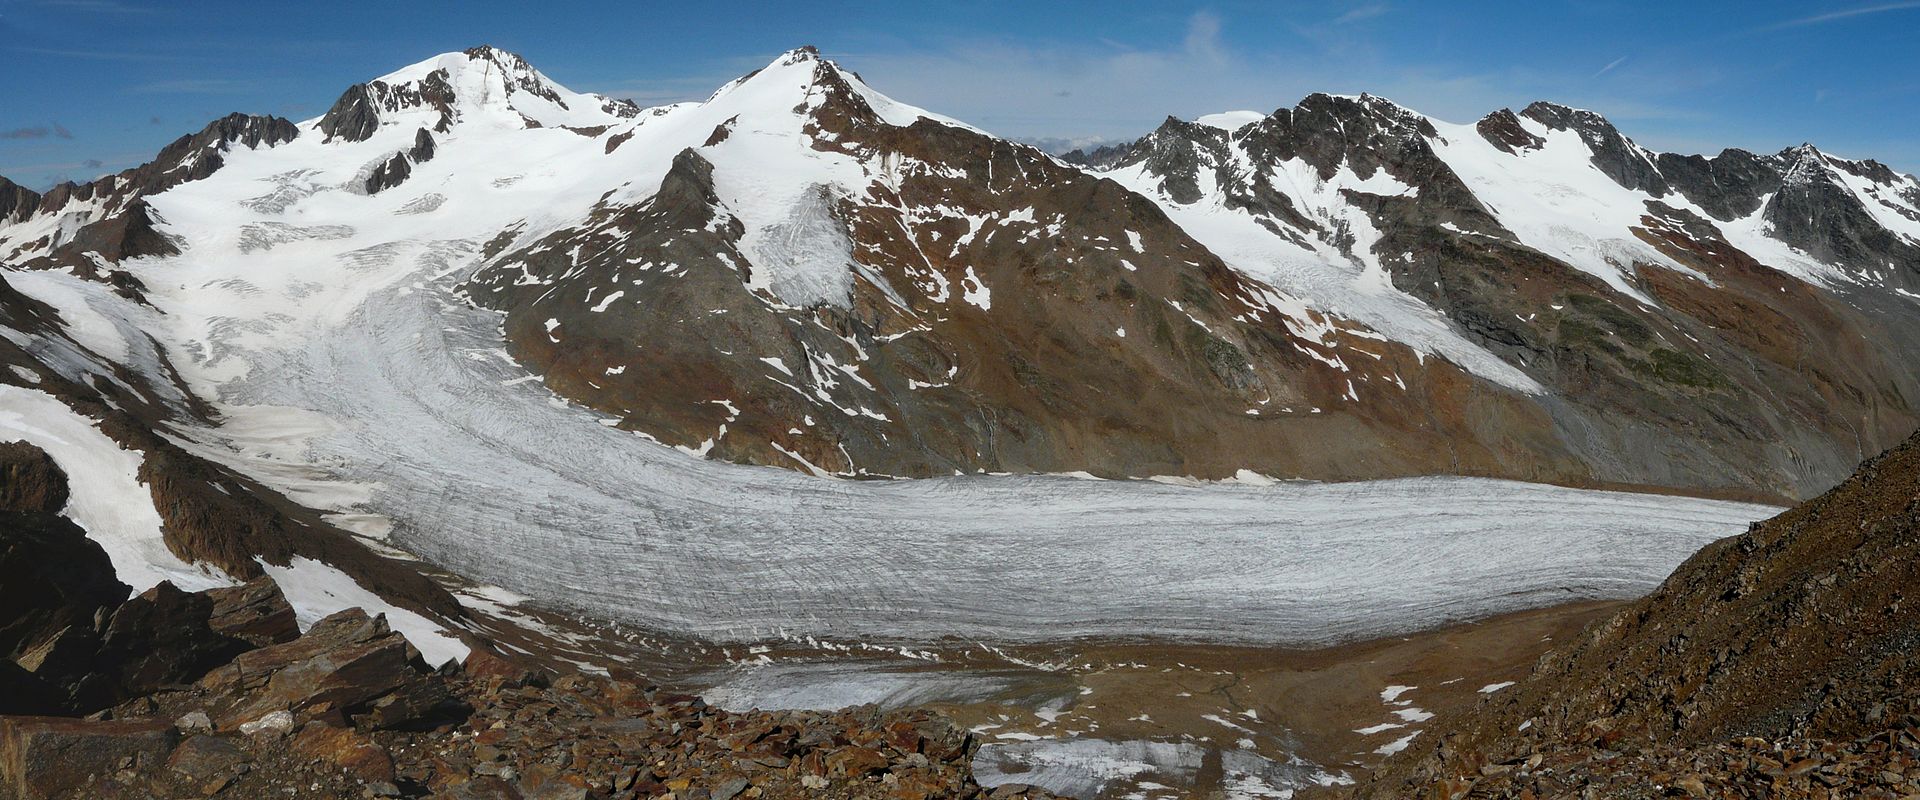 Researchers discover how to model snowpack dynamics on mountain glaciers